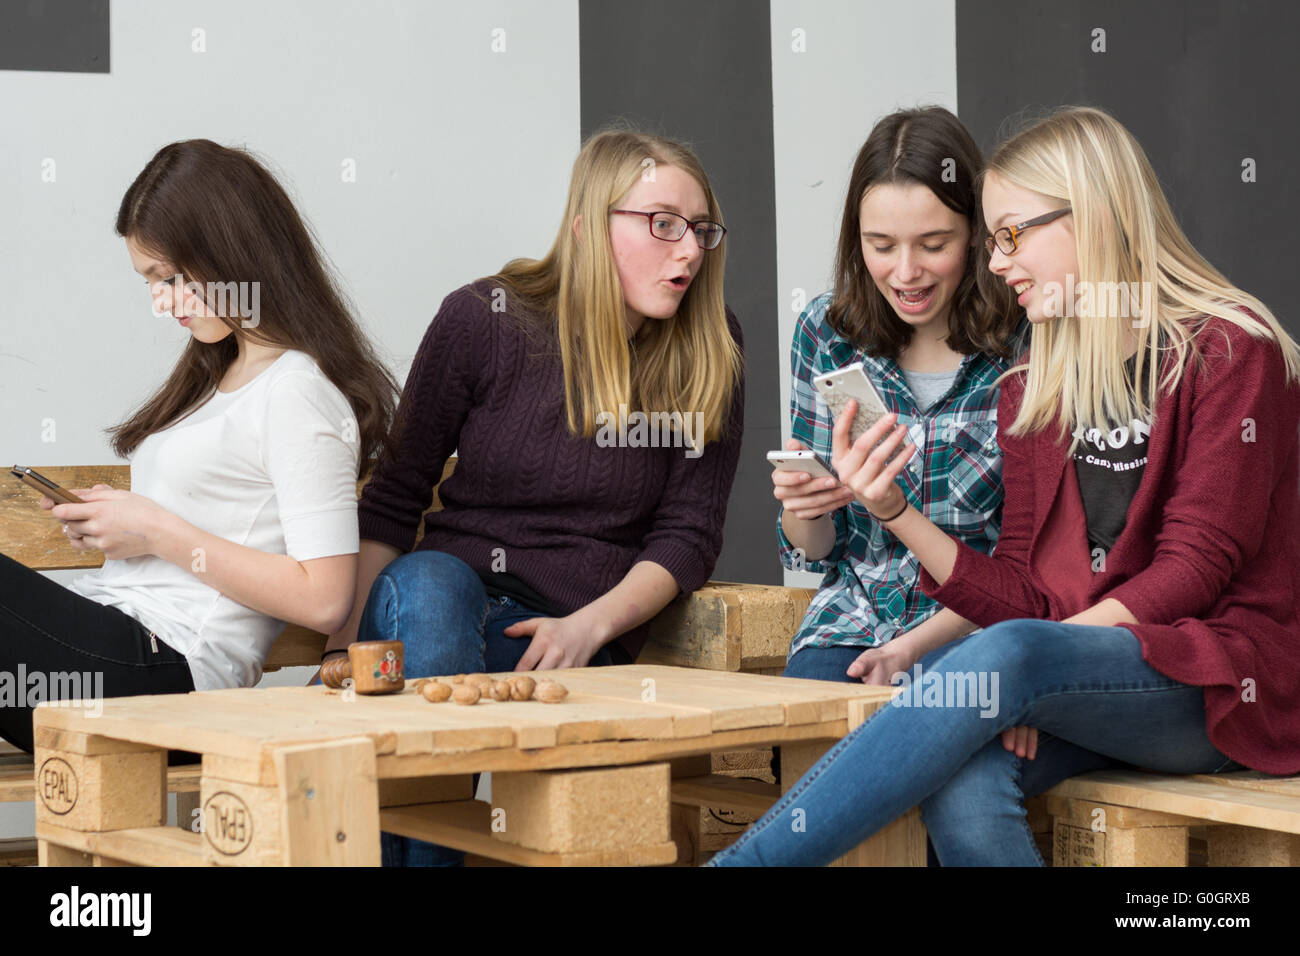 Teenager group converses with mobile phones and shows different facial expressions Stock Photo